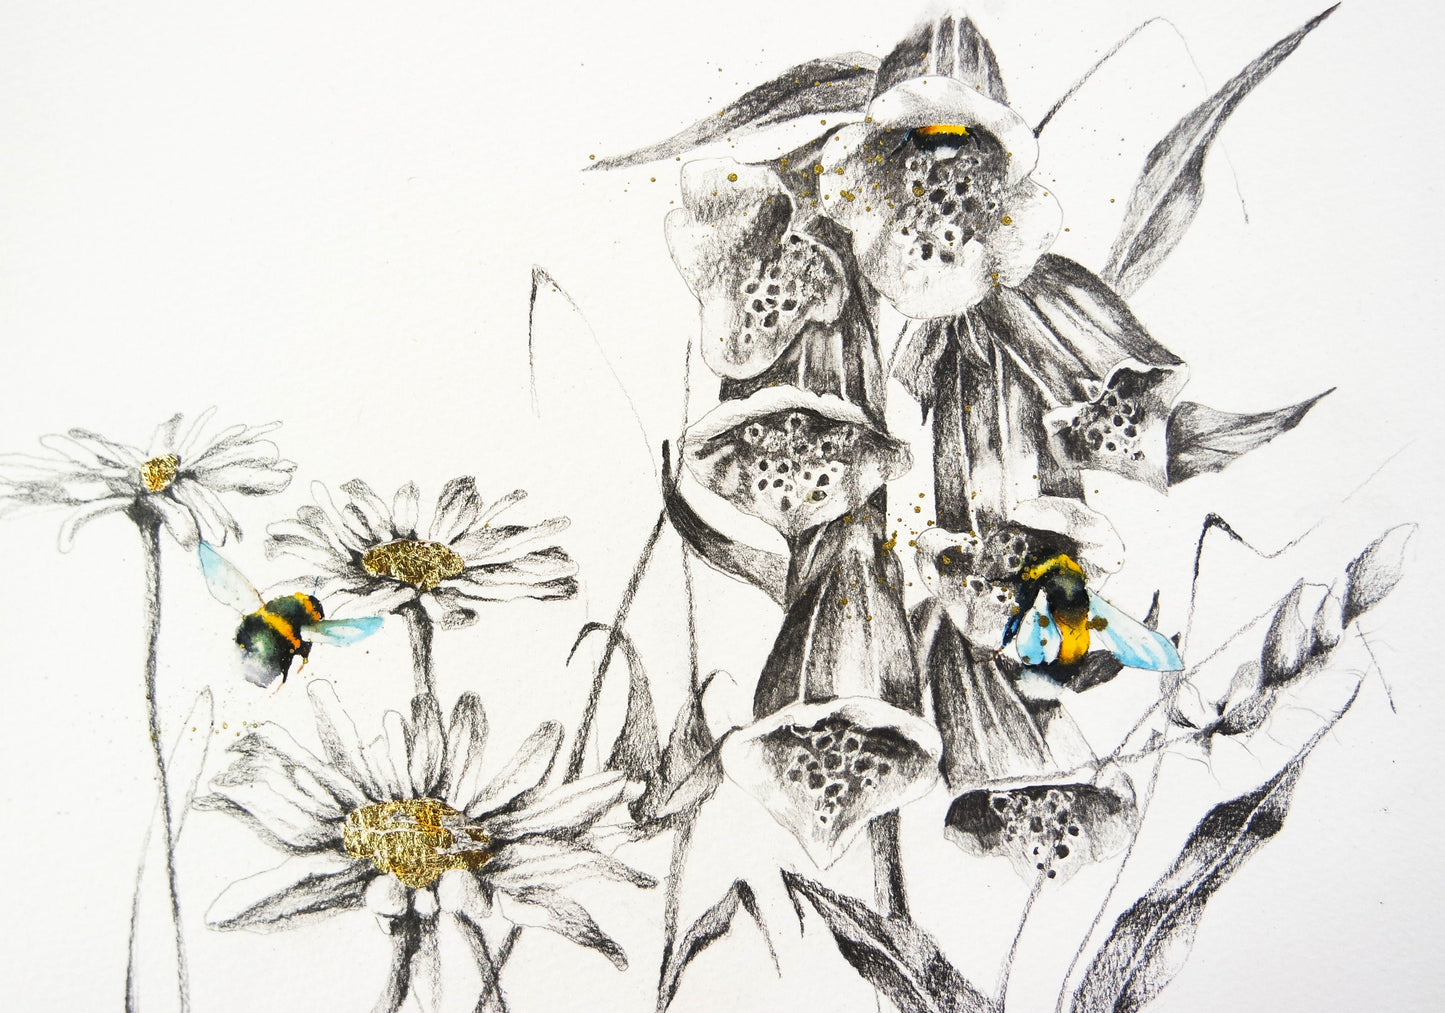 Bees, ladybirds  and sketches